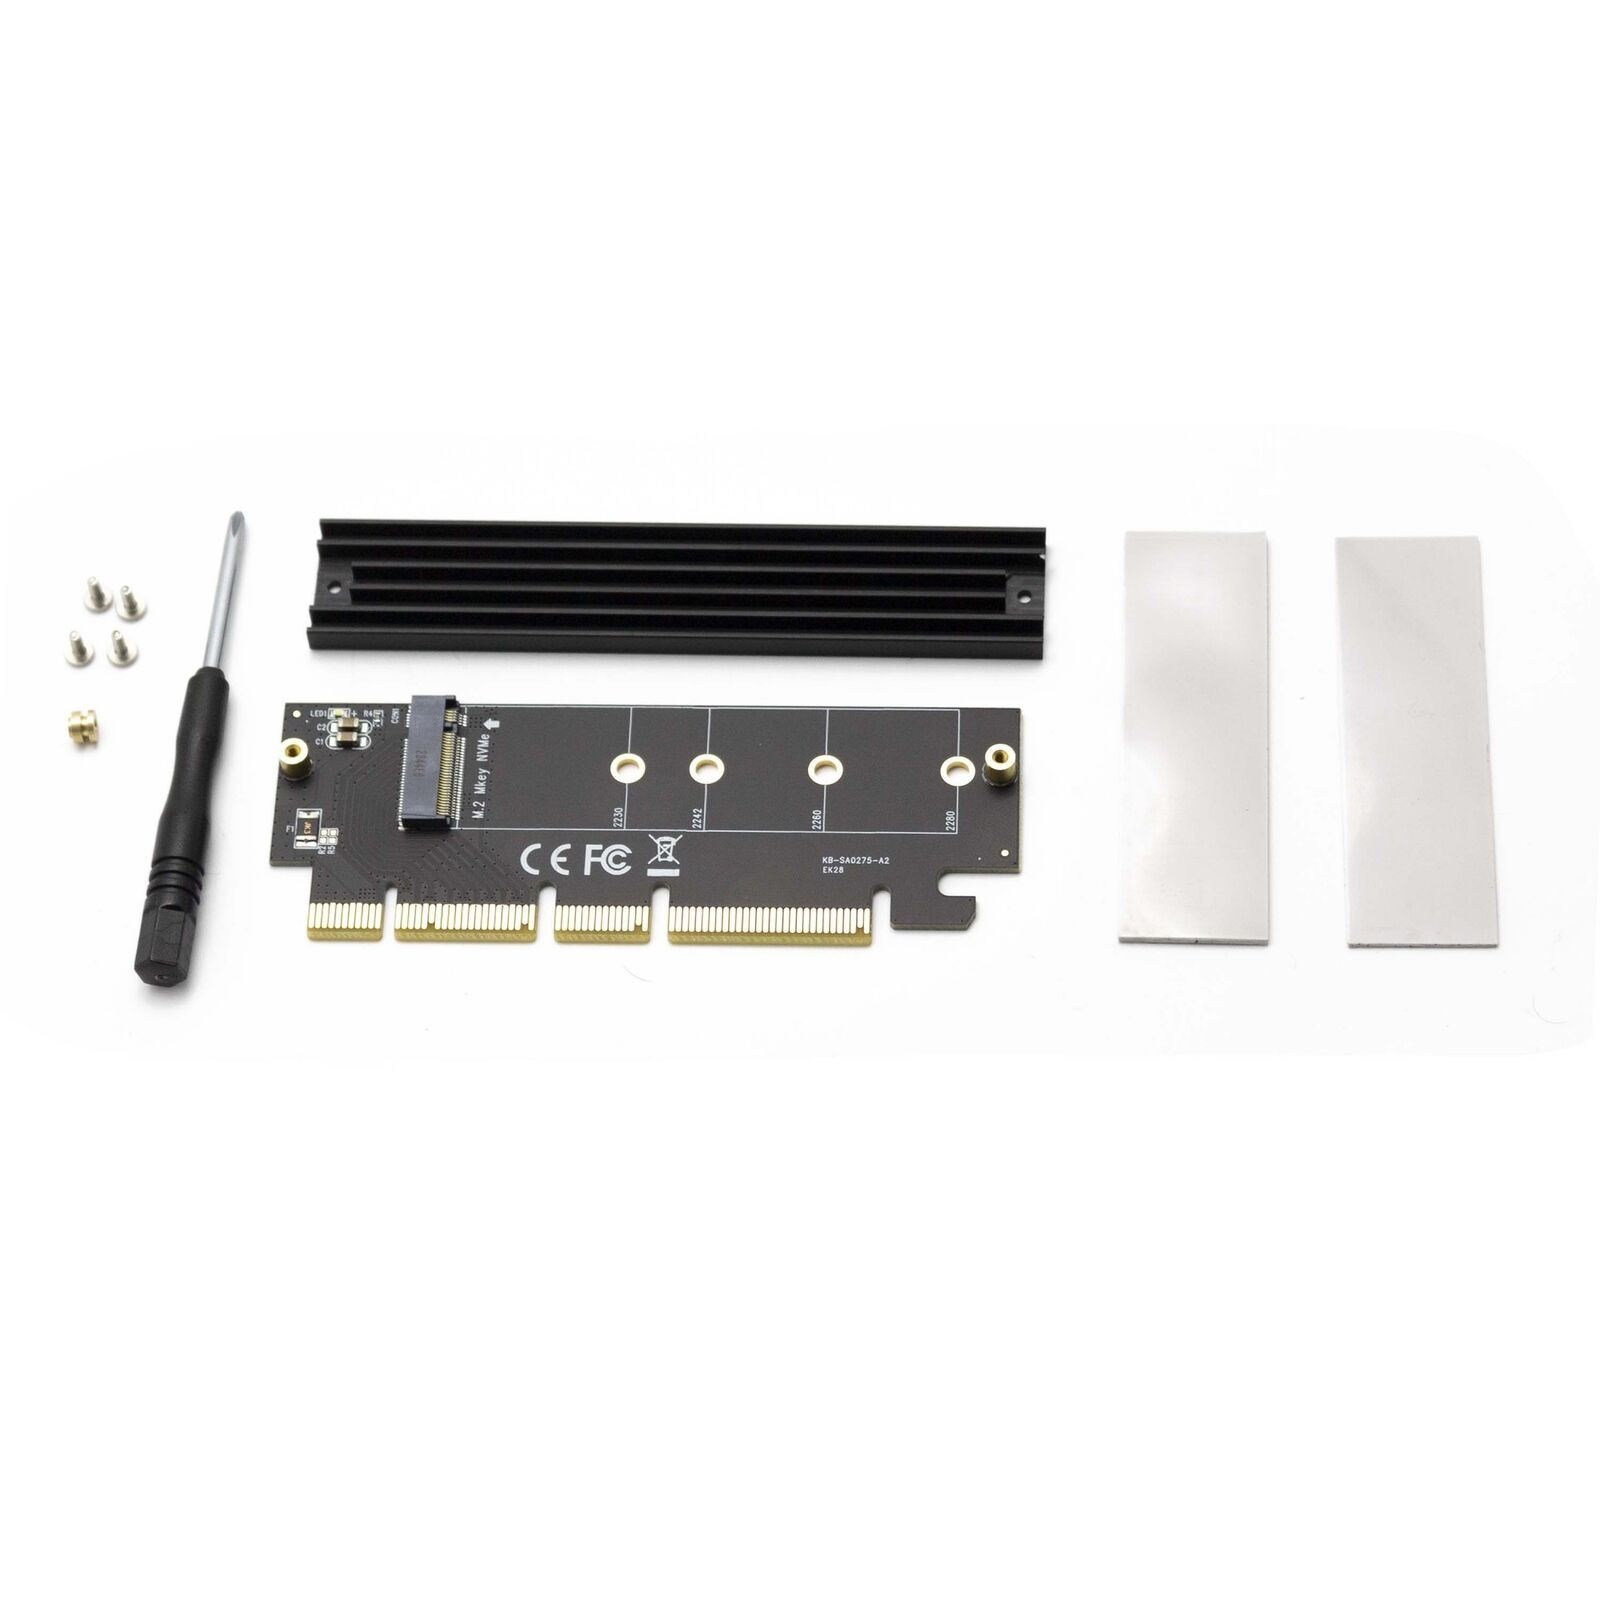 Adapter Converter Containing Pcie X4 X8 X16 4.0 Gen4 A SSD M.2 Nvme With 240GB